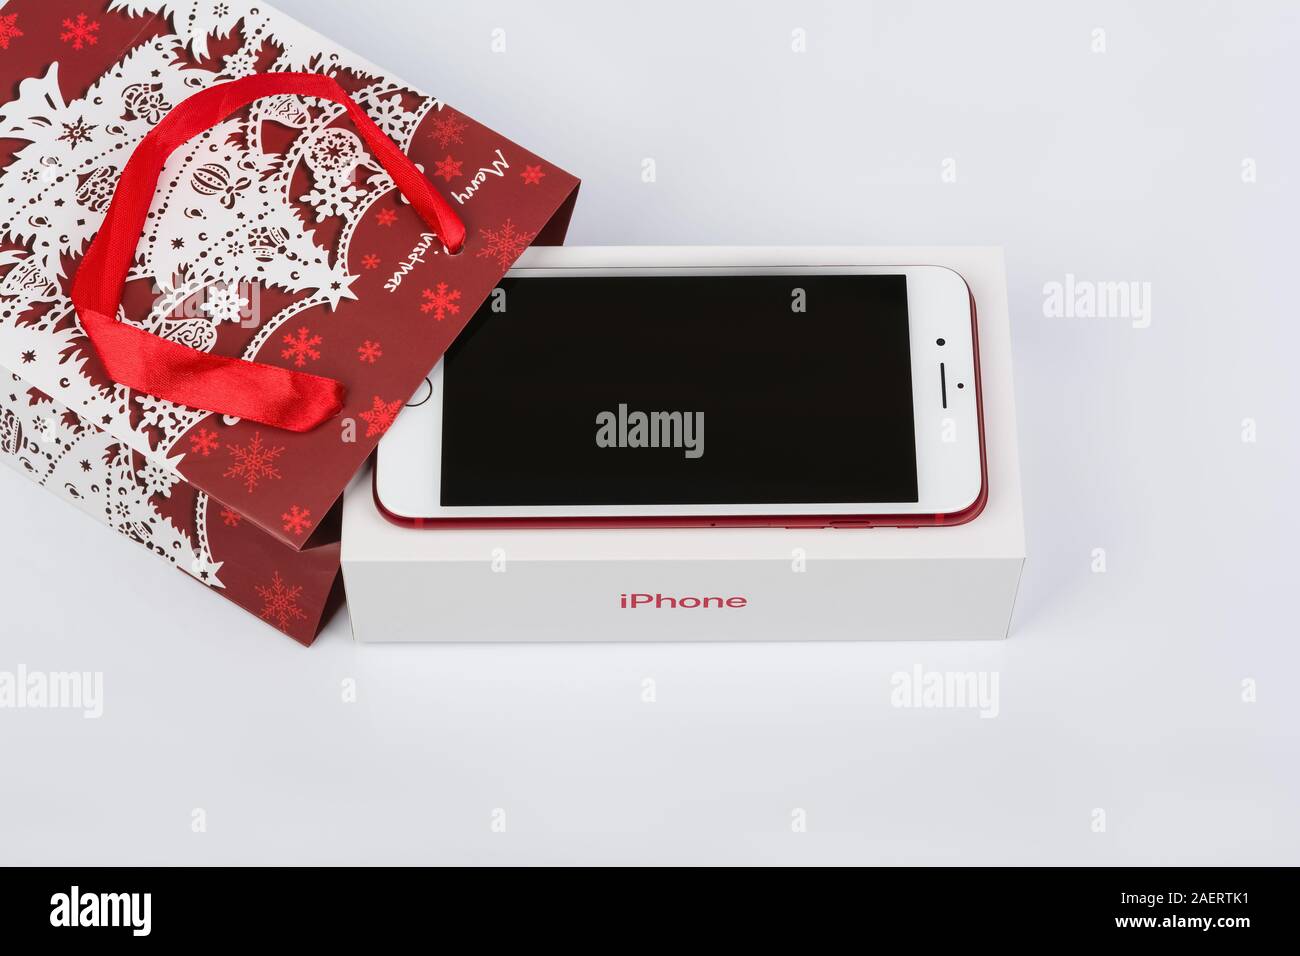 BURGAS, BULGARIA - DECEMBER 10, 2019: Apple iPhone 7 Plus Red Special Edition on white background, front side. Christmas gift. Stock Photo